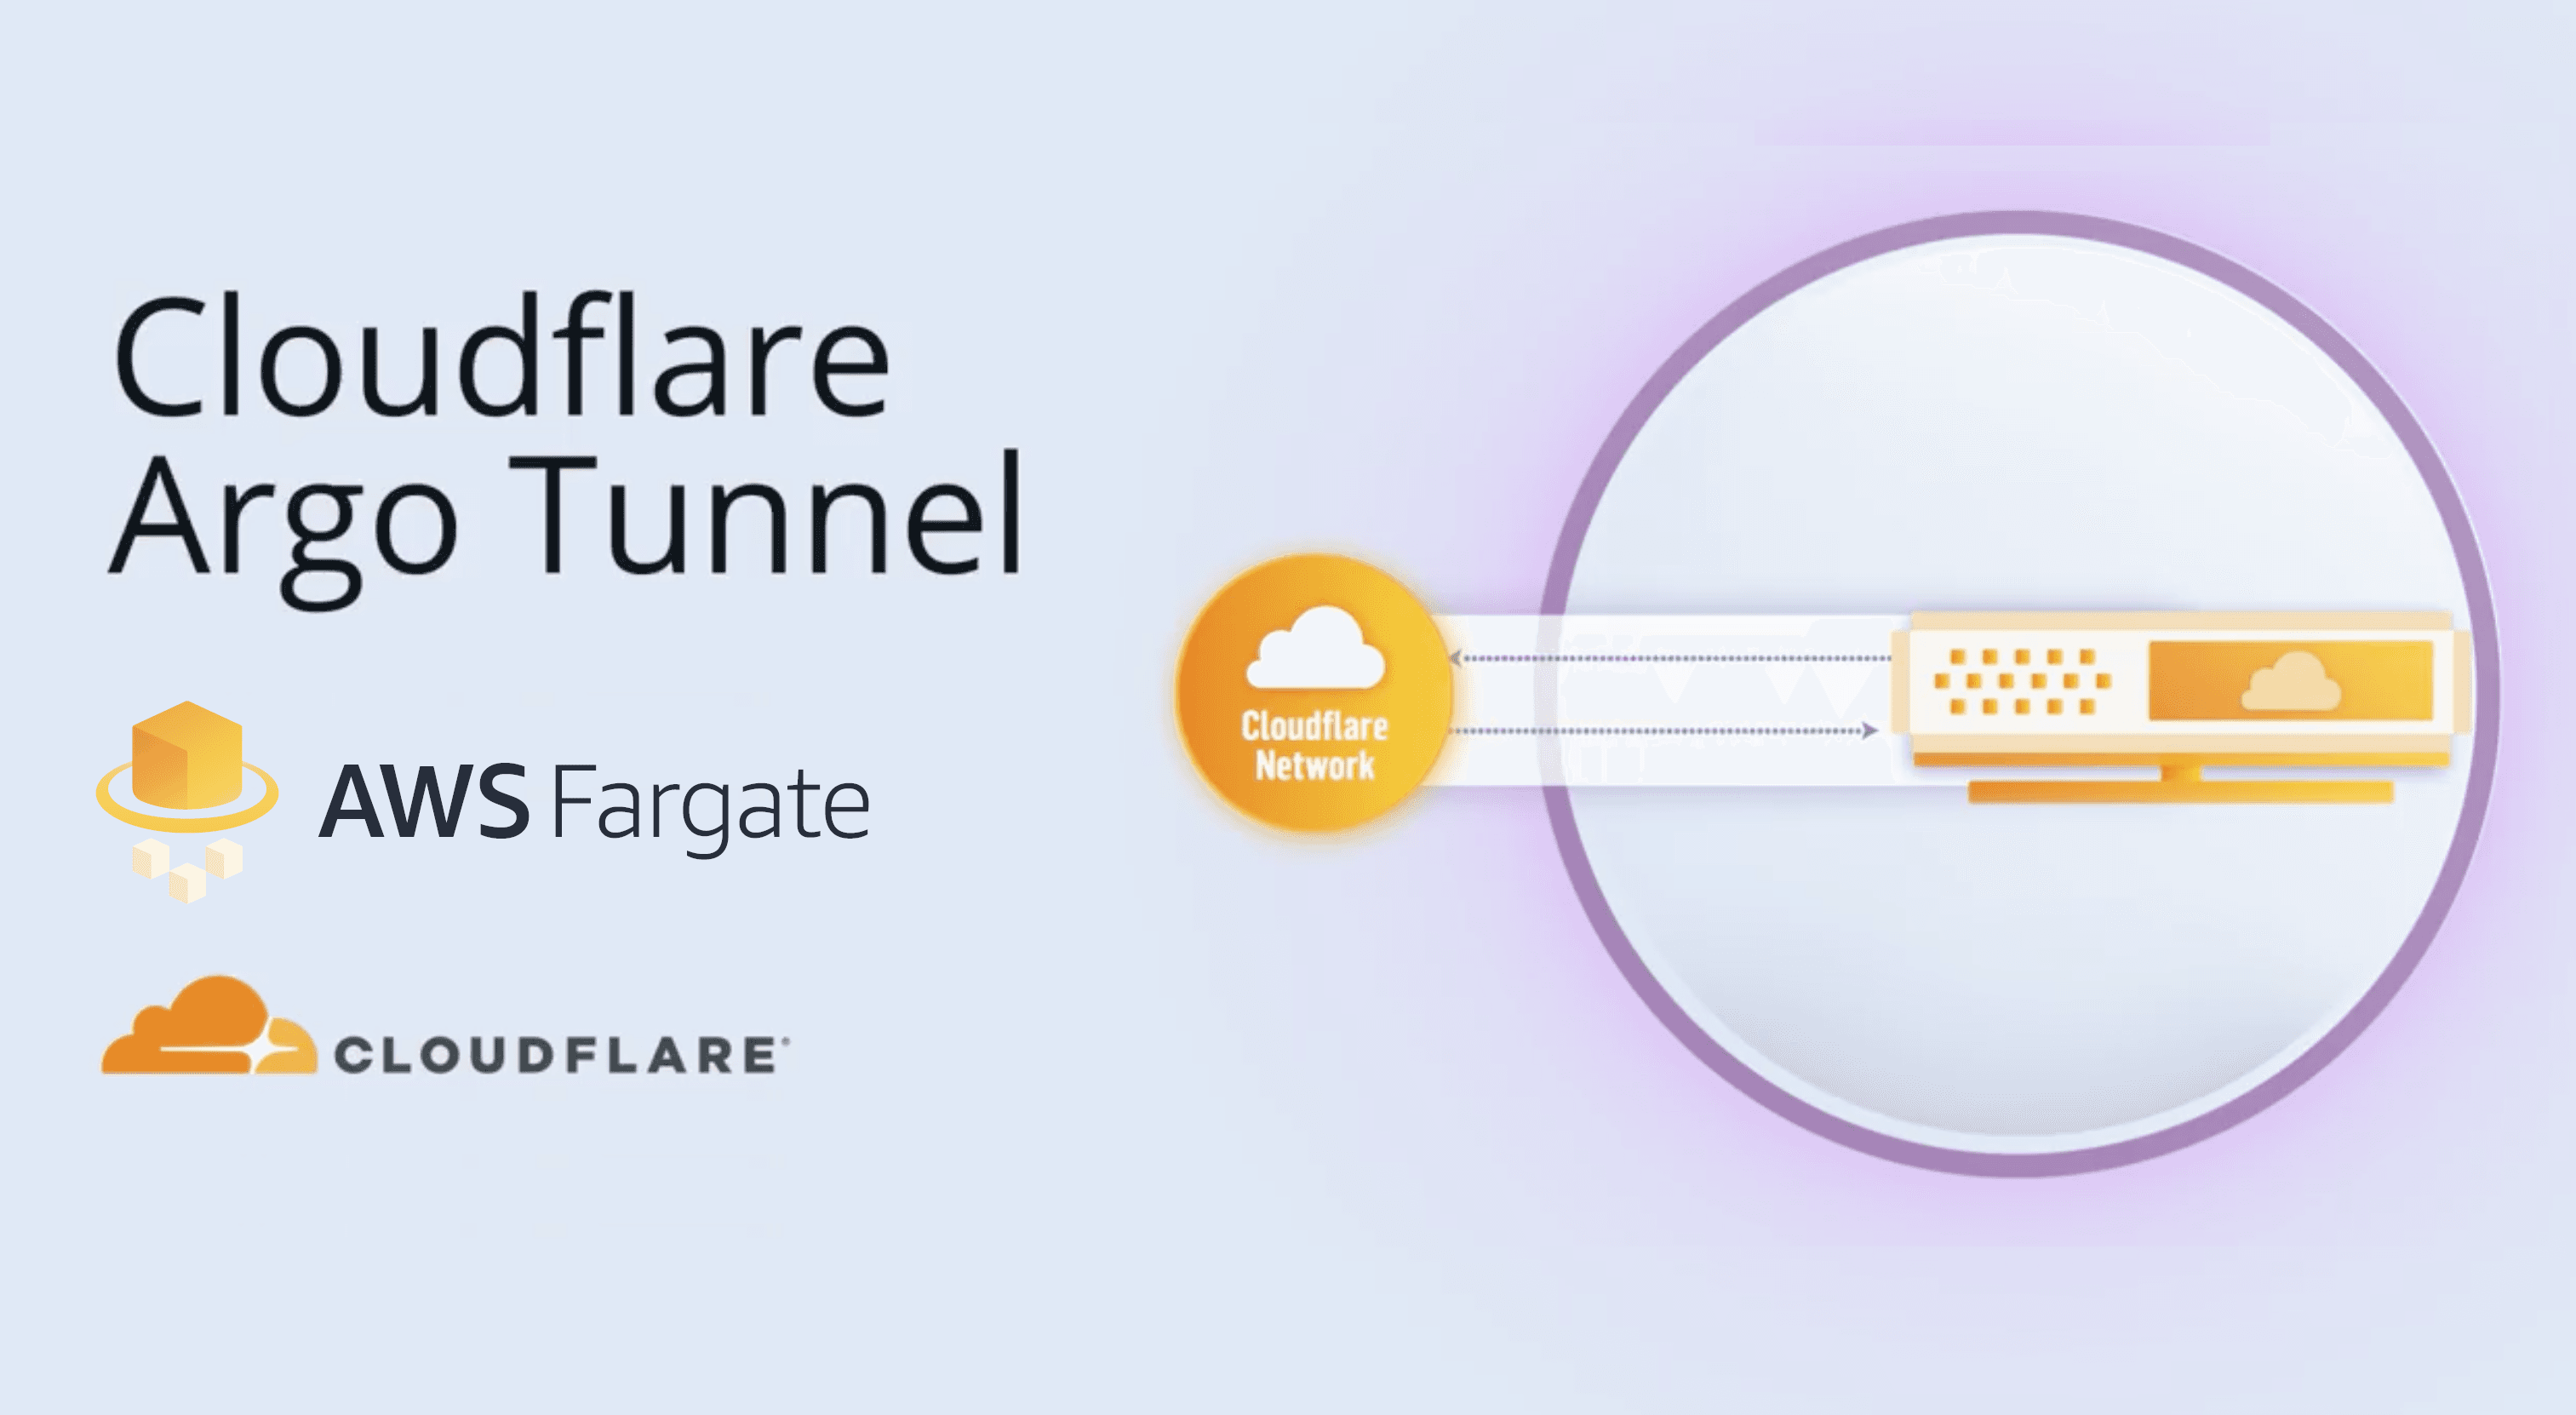 Setting up a Cloudflare Argo Tunnel on AWS Fargate.